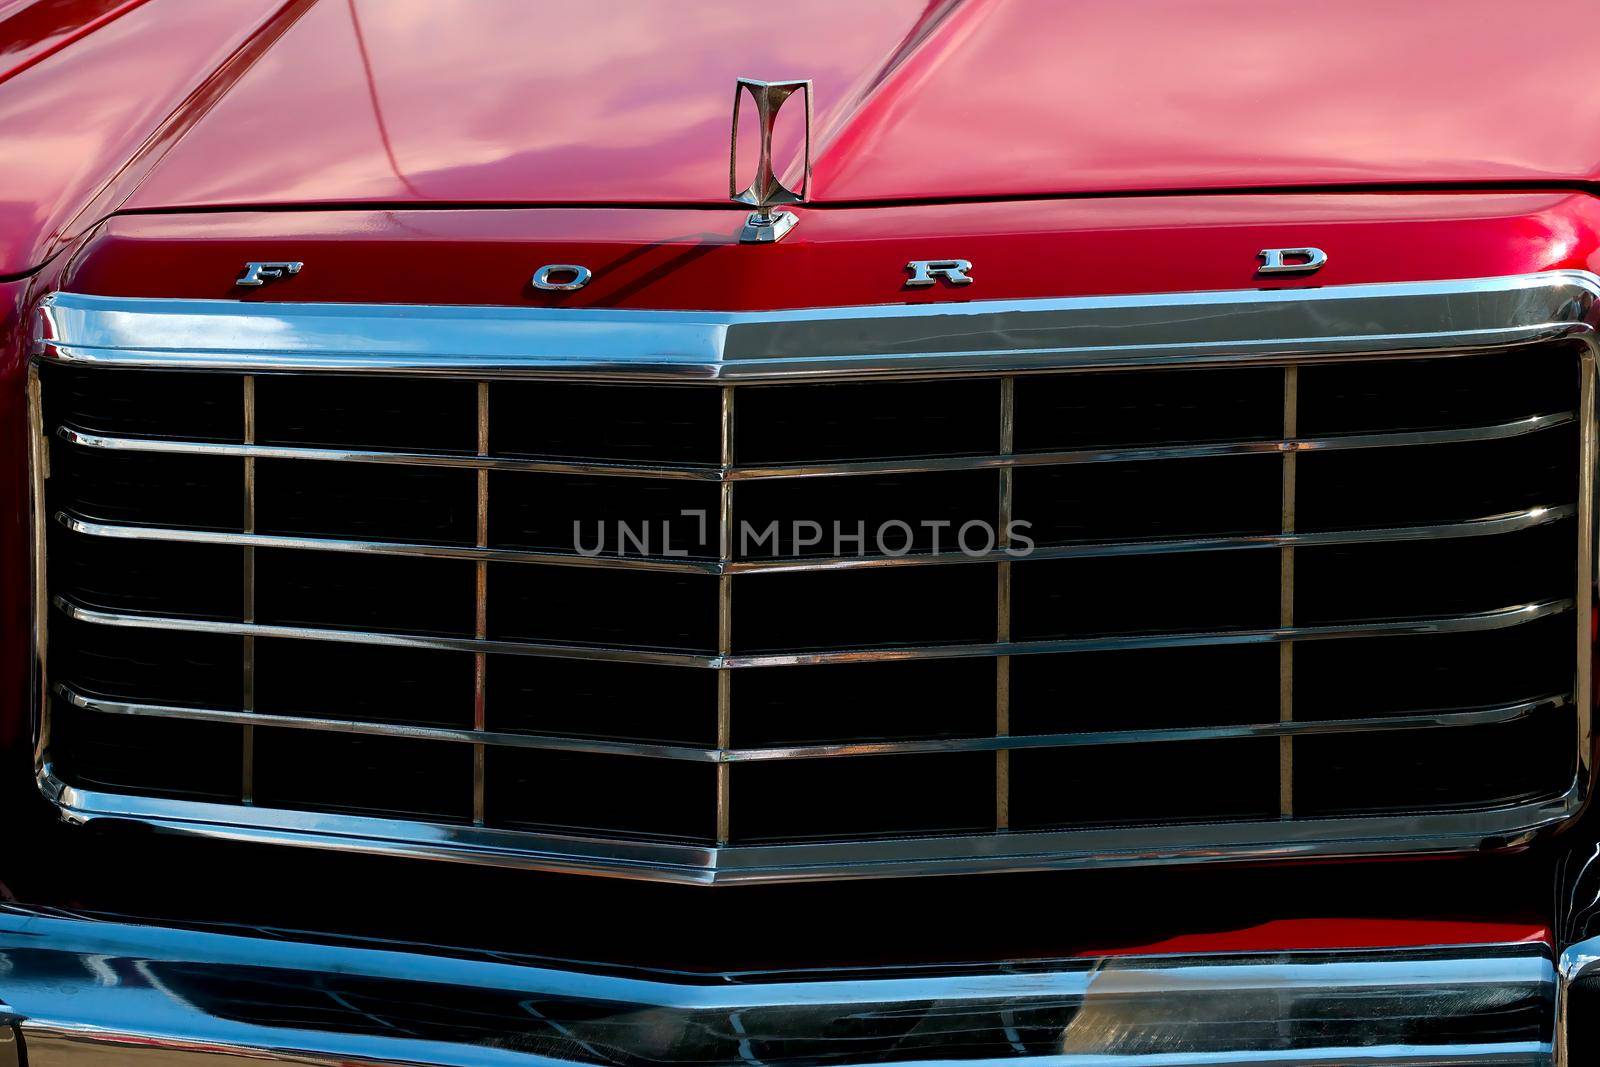 Wroclaw, Poland, August 25, 2021: front view of a red old Ford car